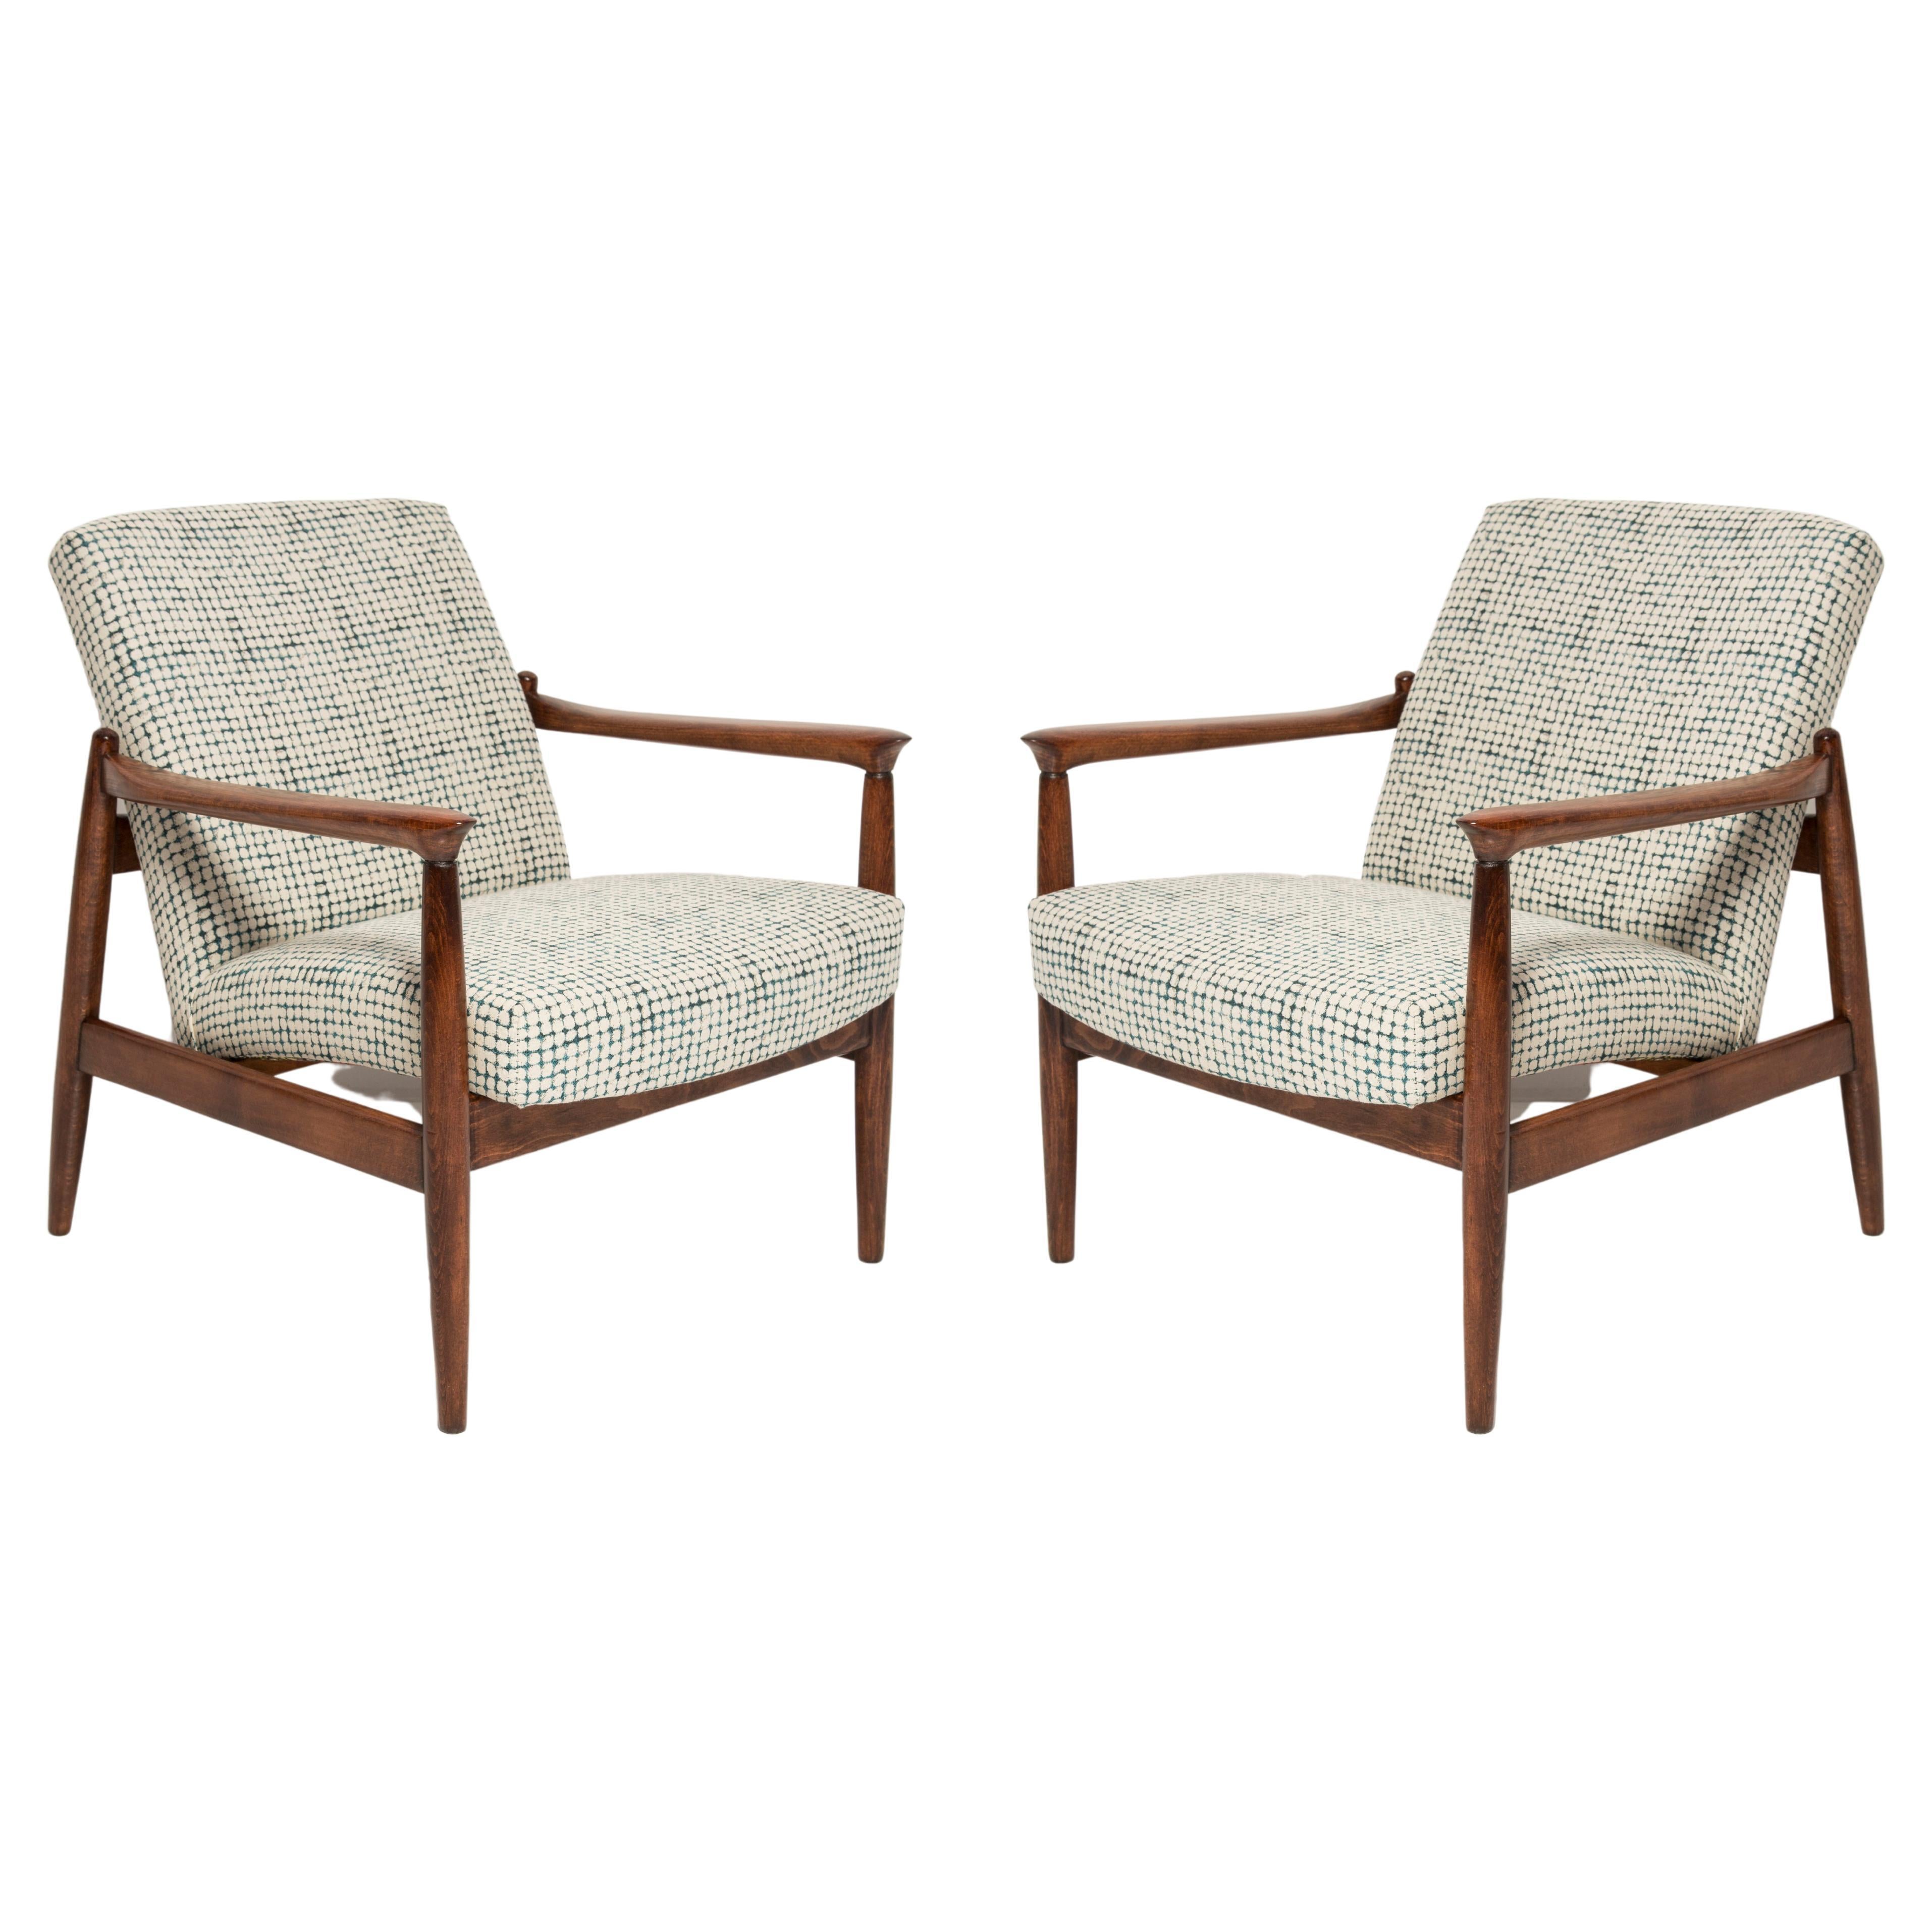 Set of Two Mid Century White and Aqua GFM 64 Armchairs, Edmund Homa, Europe, 1960s For Sale